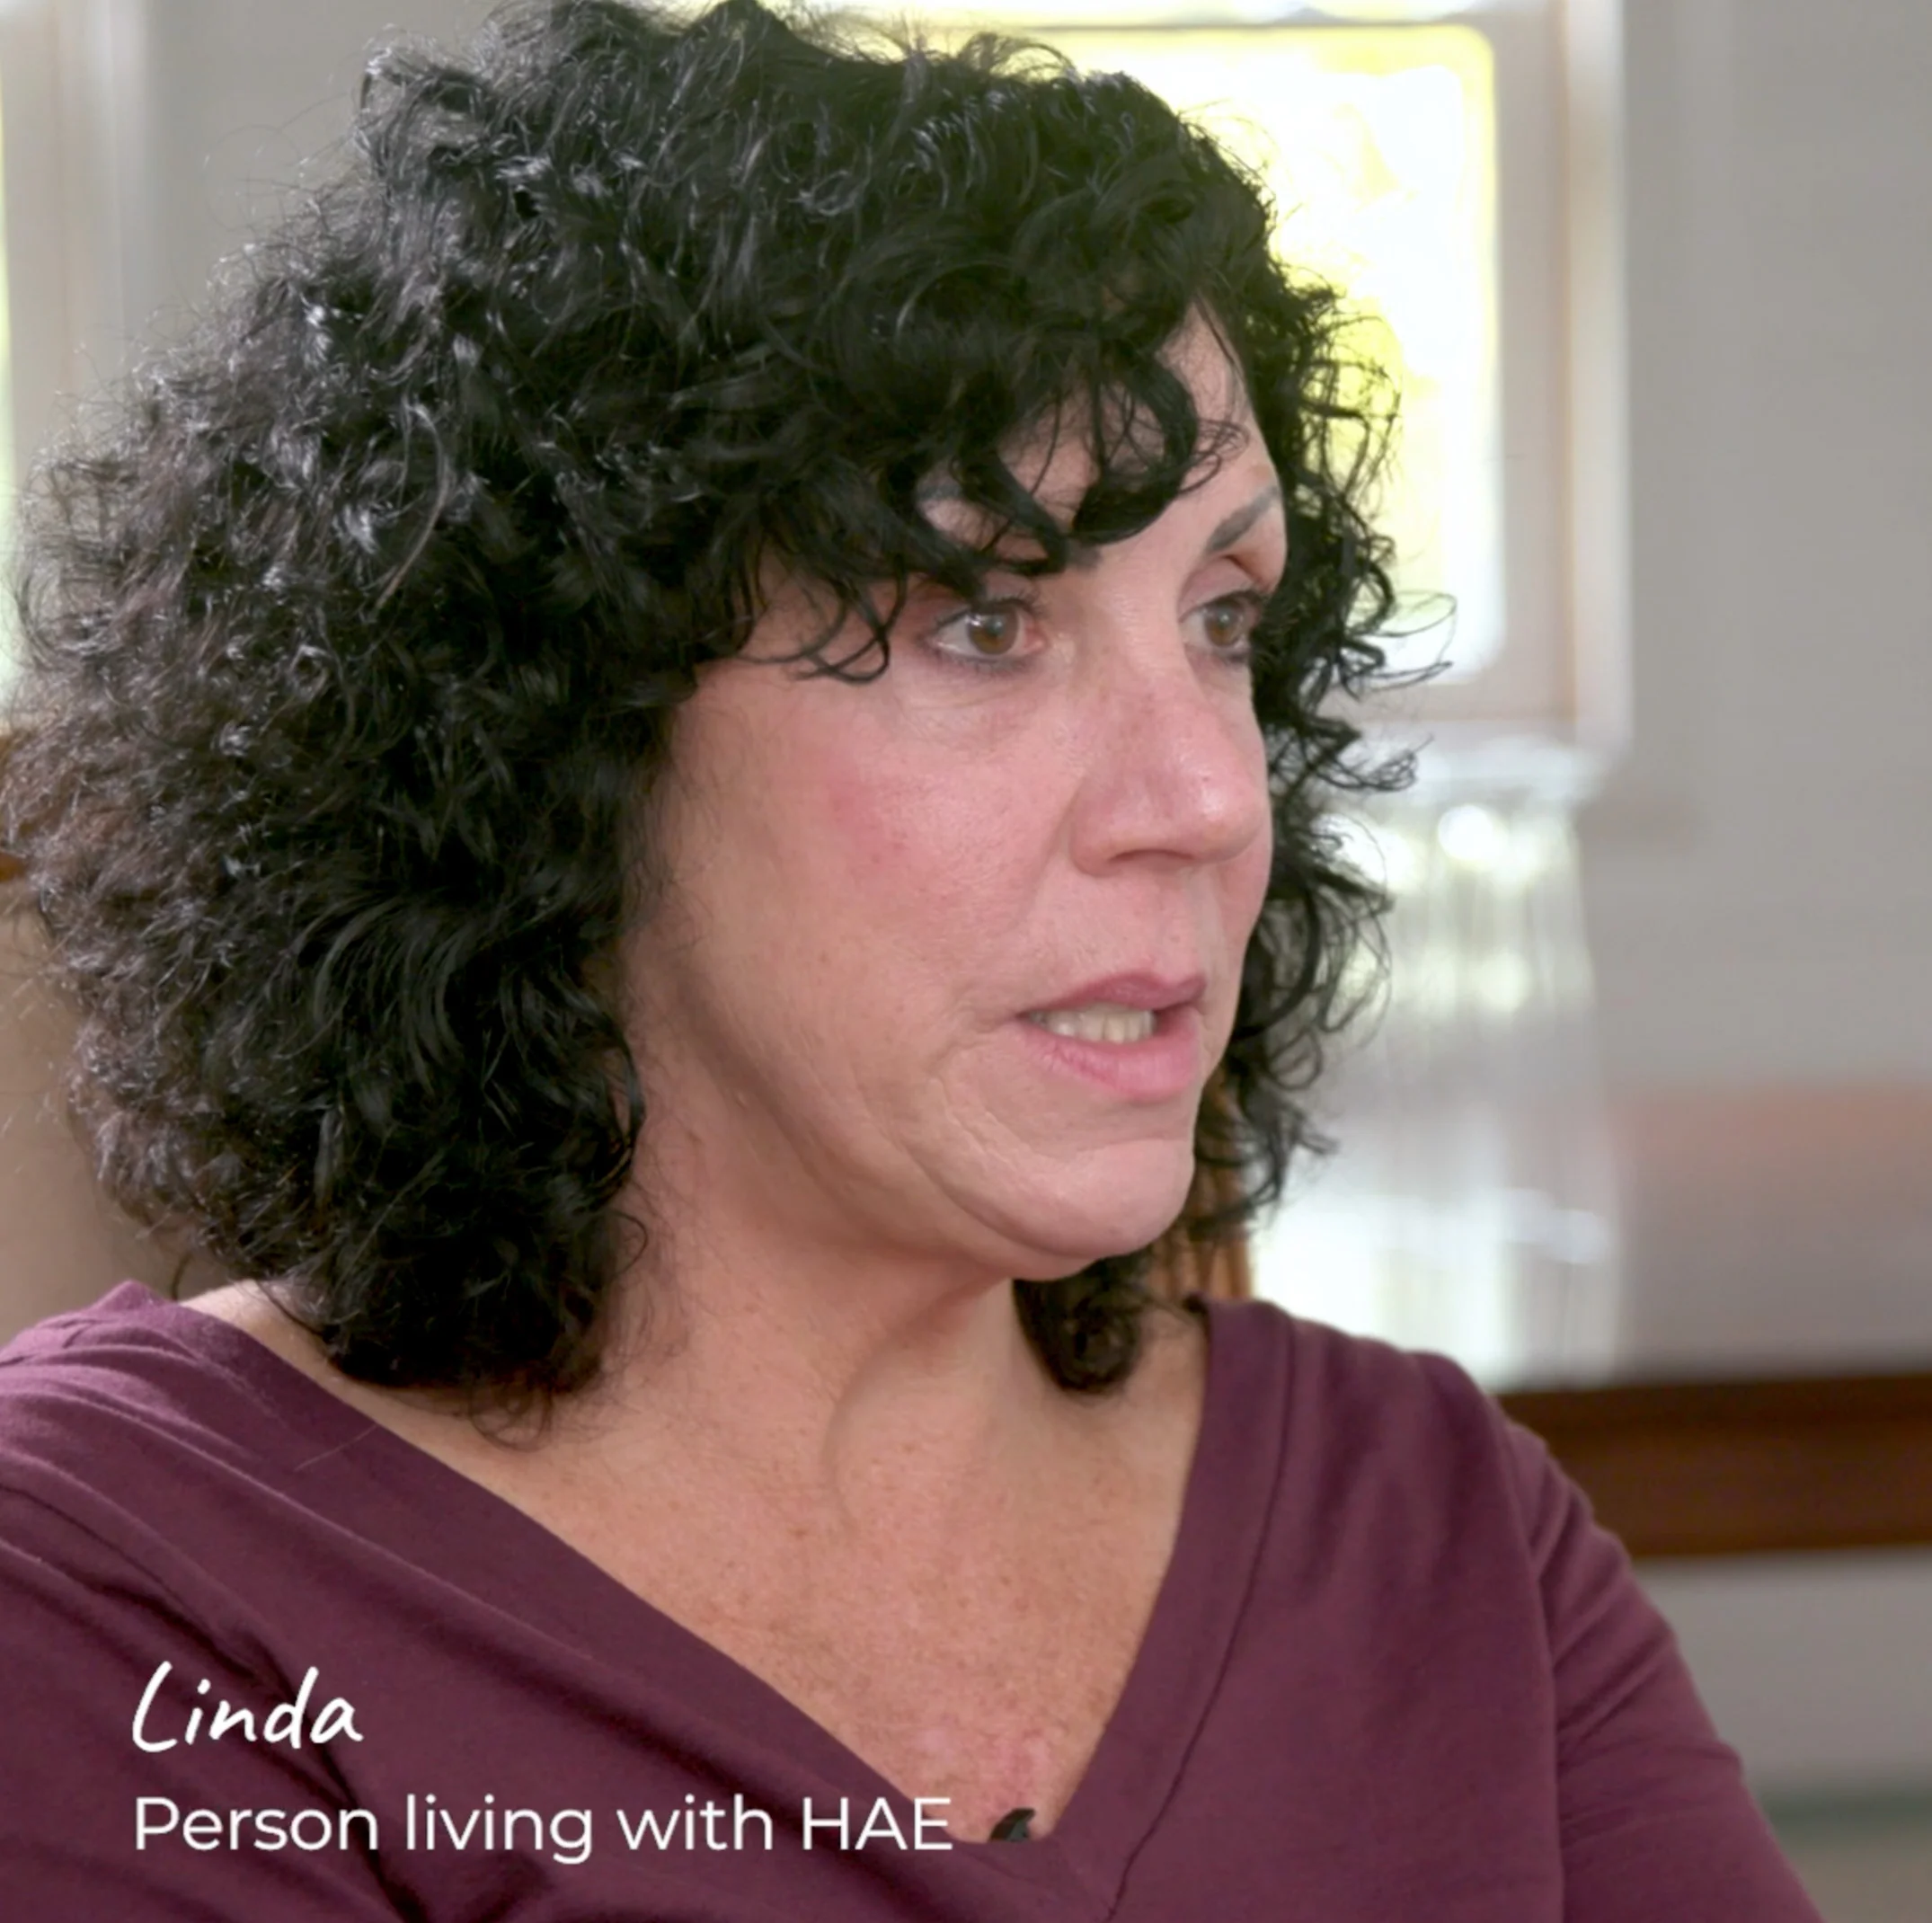 Video preview thumbnail of Linda, a real person living with HAE sharing her story about treating in minutes